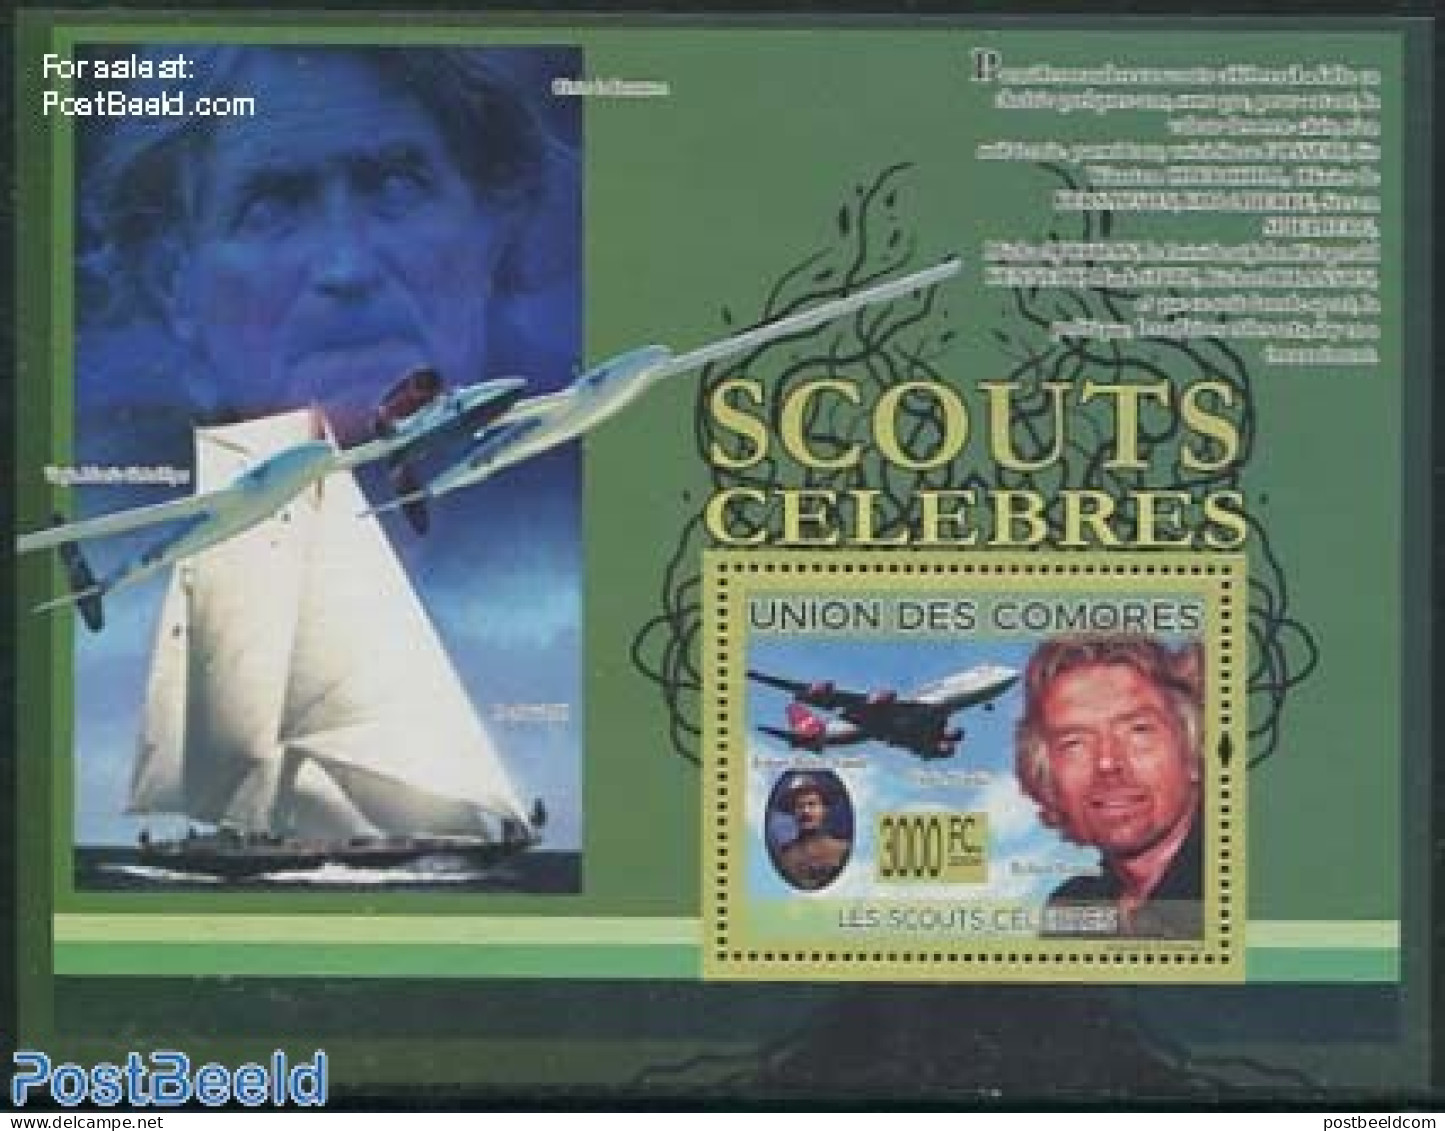 Comoros 2009 Famous Scouts, Richard Branson S/s, Mint NH, Sport - Transport - Sailing - Scouting - Aircraft & Aviation.. - Segeln